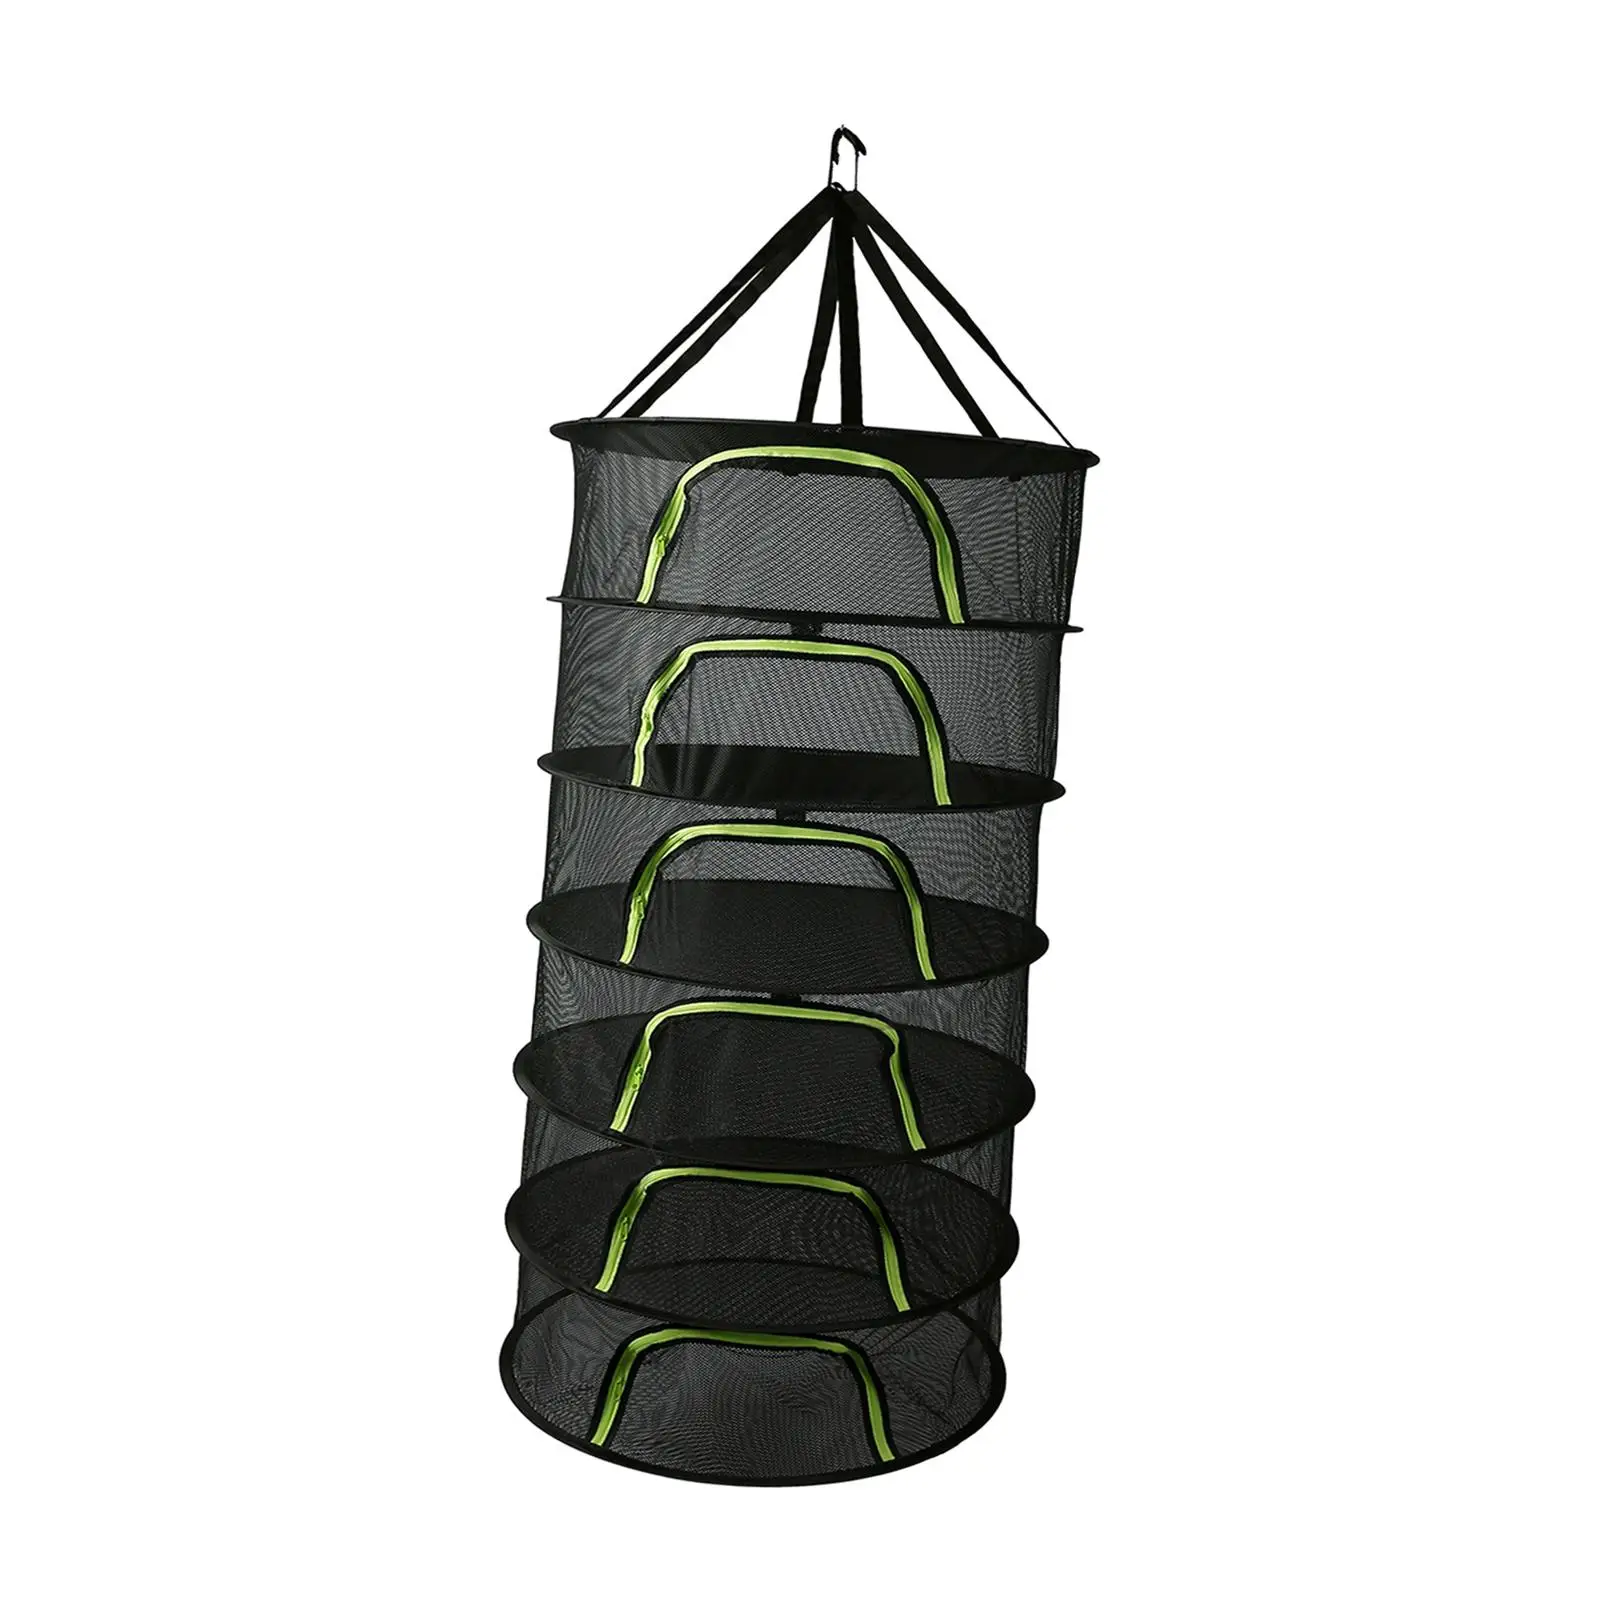 Plants Drying Rack Drying Net with Zipper Opening, Hanging Drying Fish Net, Hanging Mesh Dryer for Food Tea Clothes